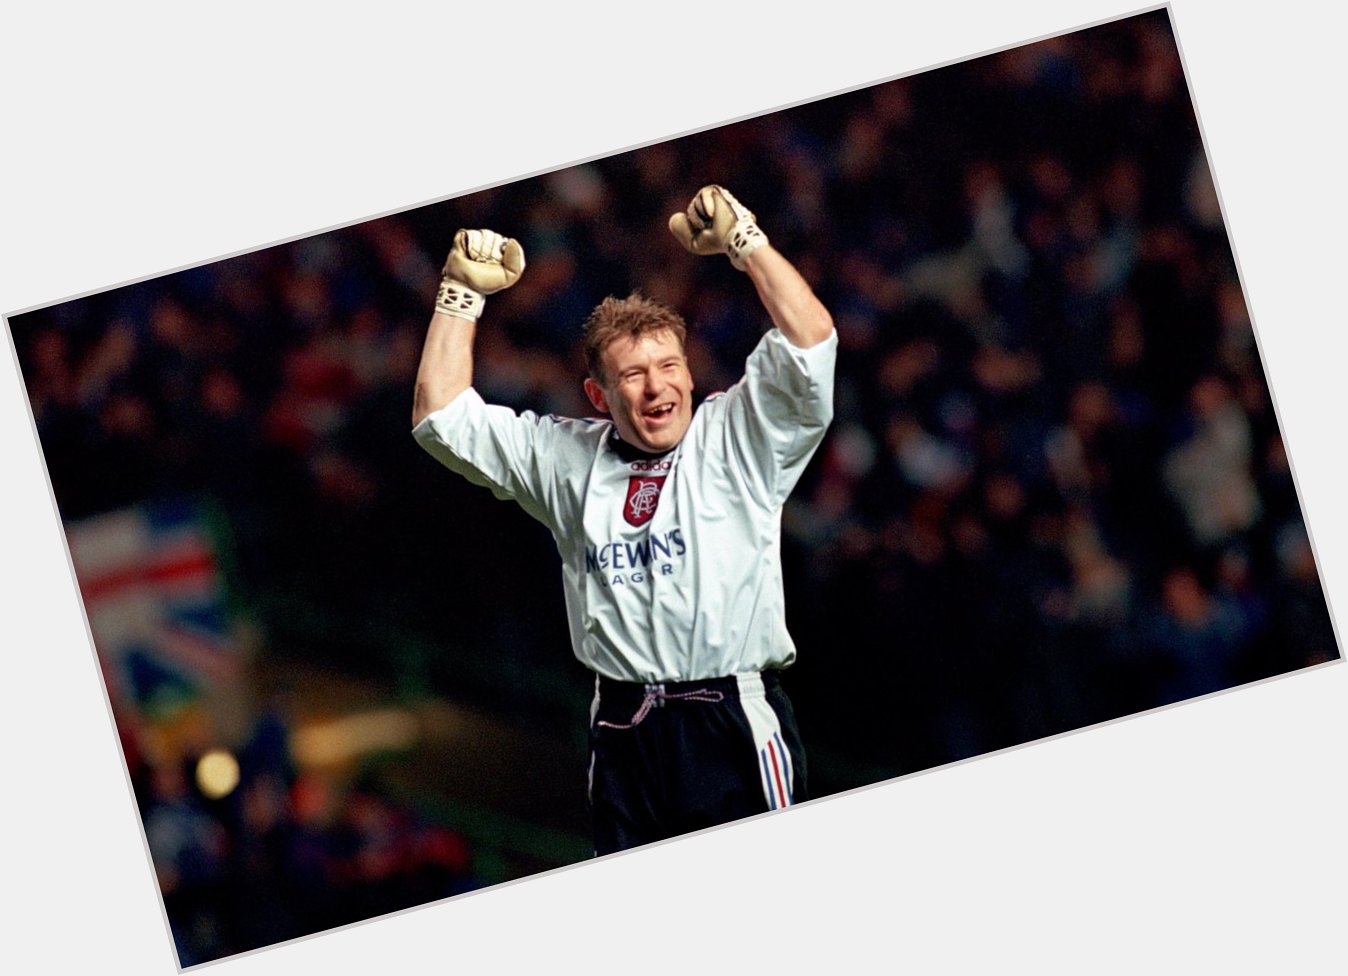 Happy Birthday, Andy Goram

260 Games.
109 Clean Sheets.
10 Trophies. 